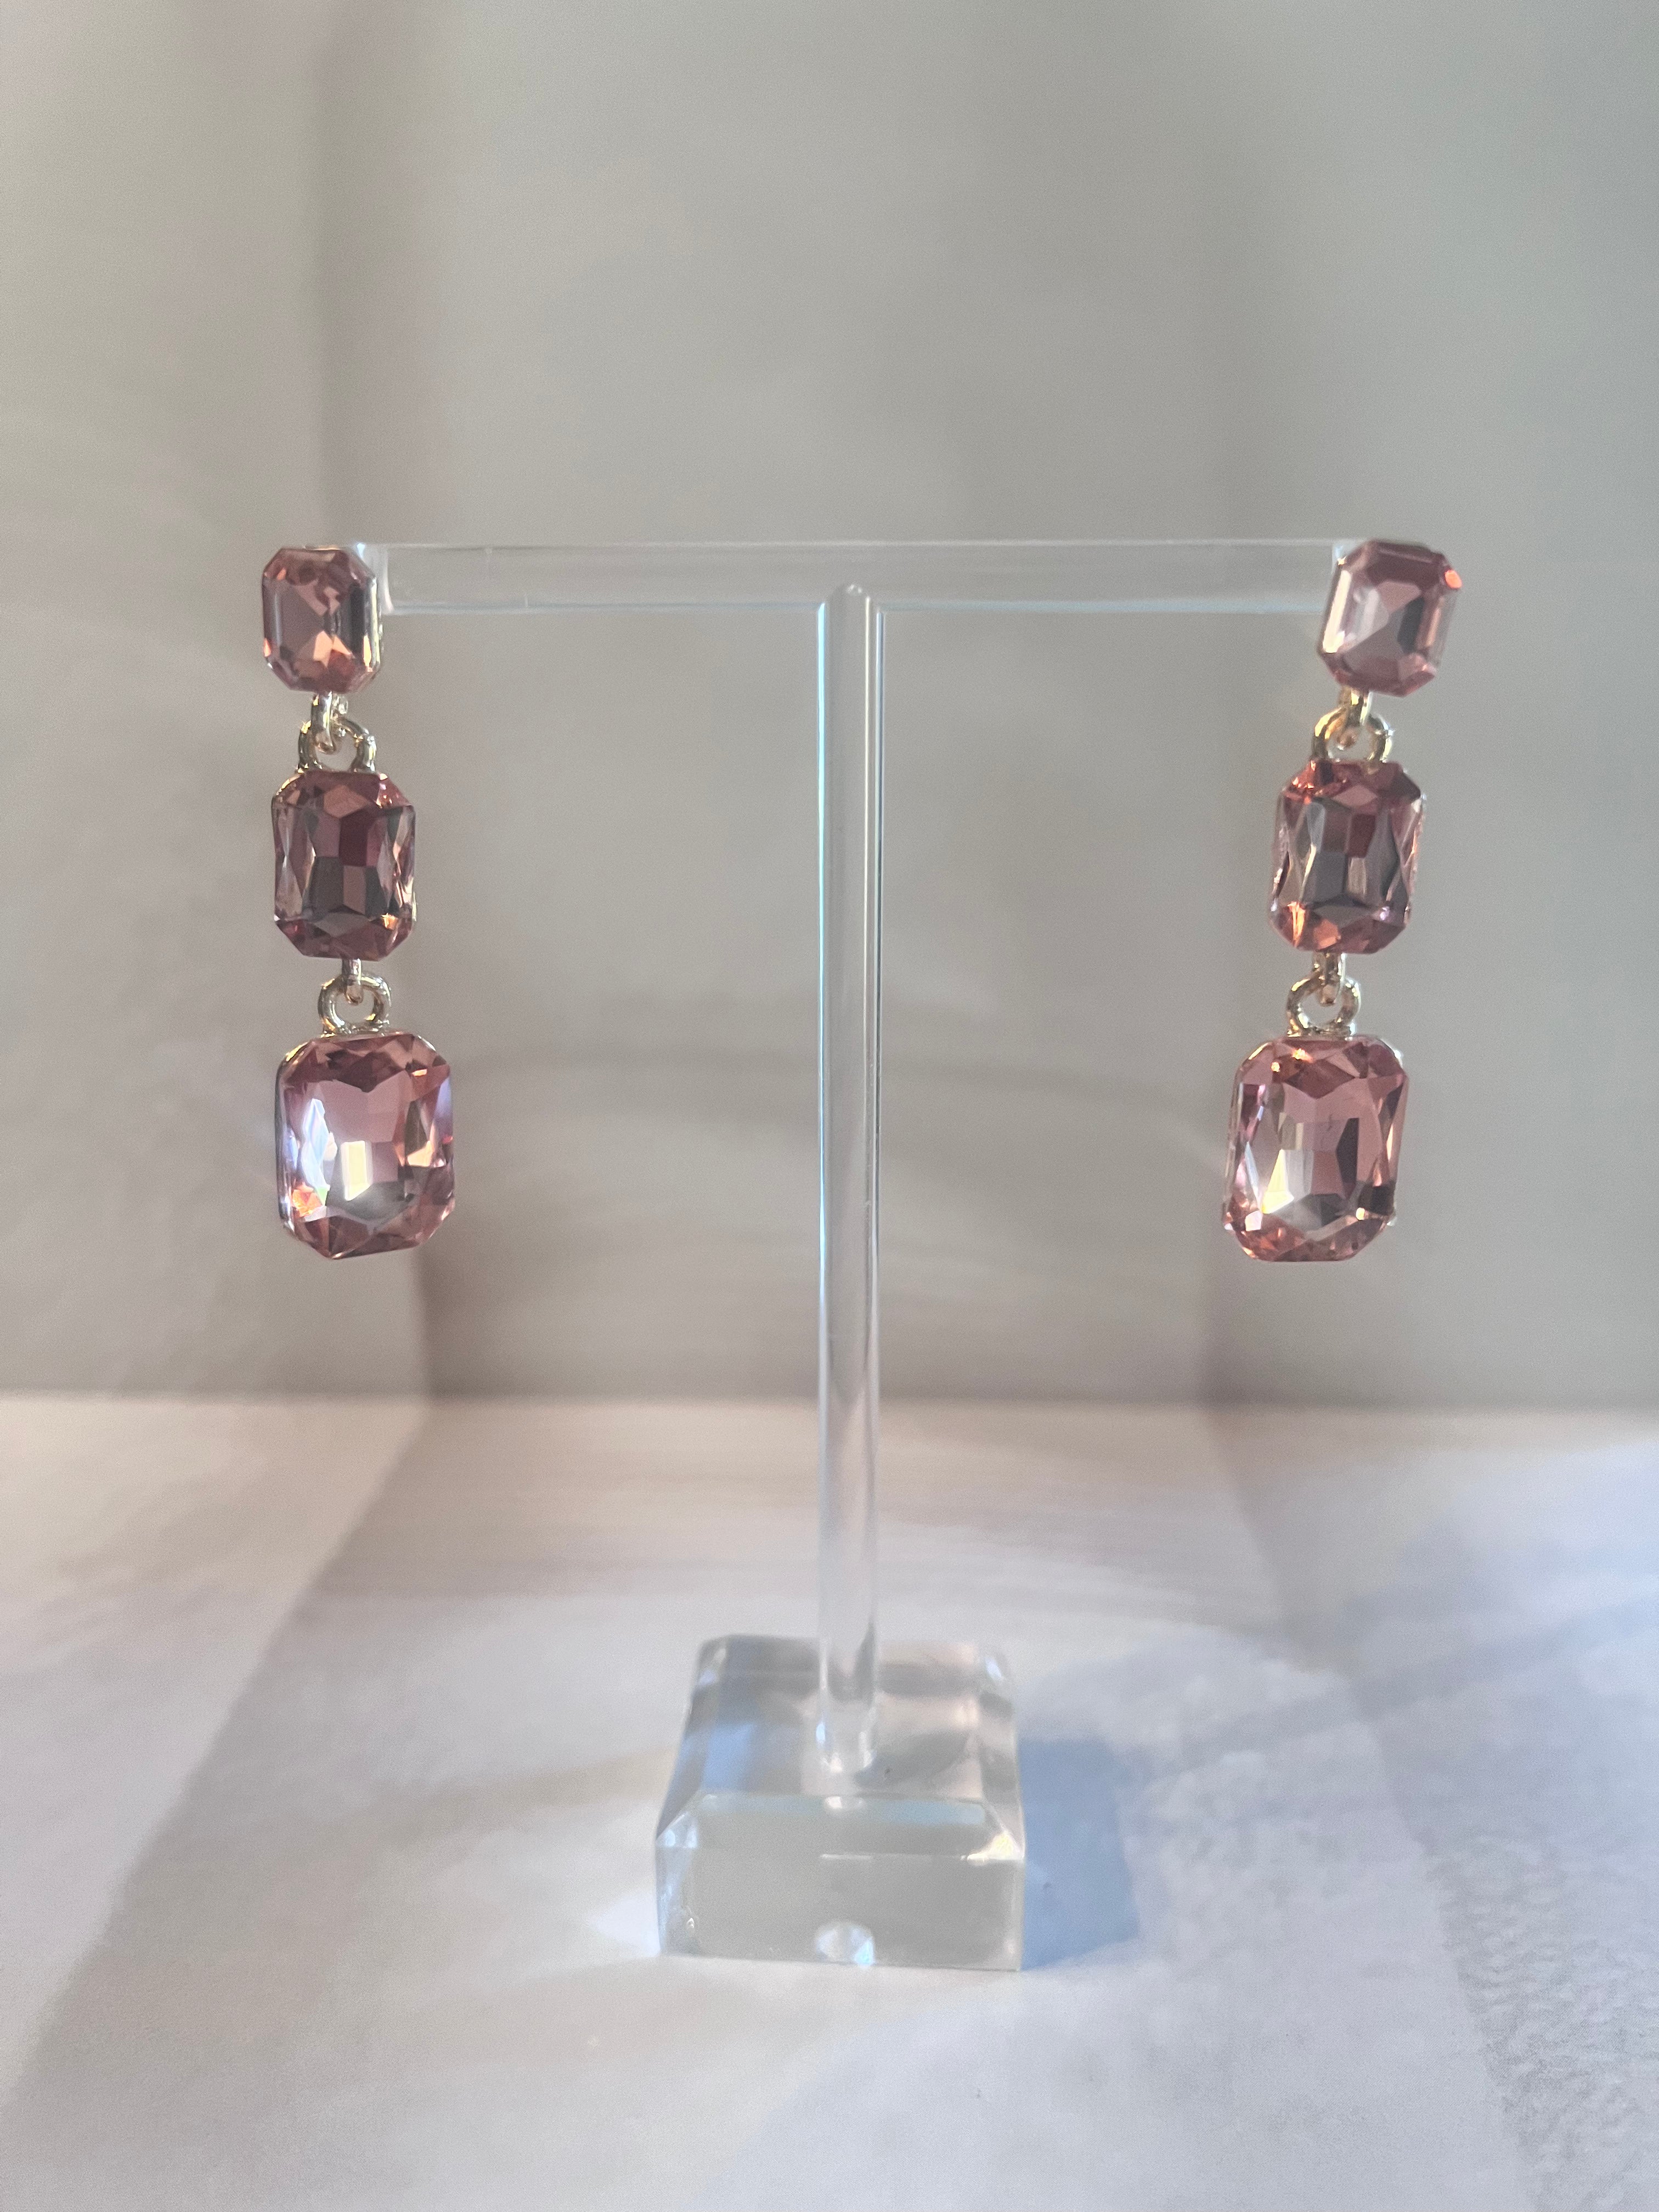 Rosegold Stacked Earrings